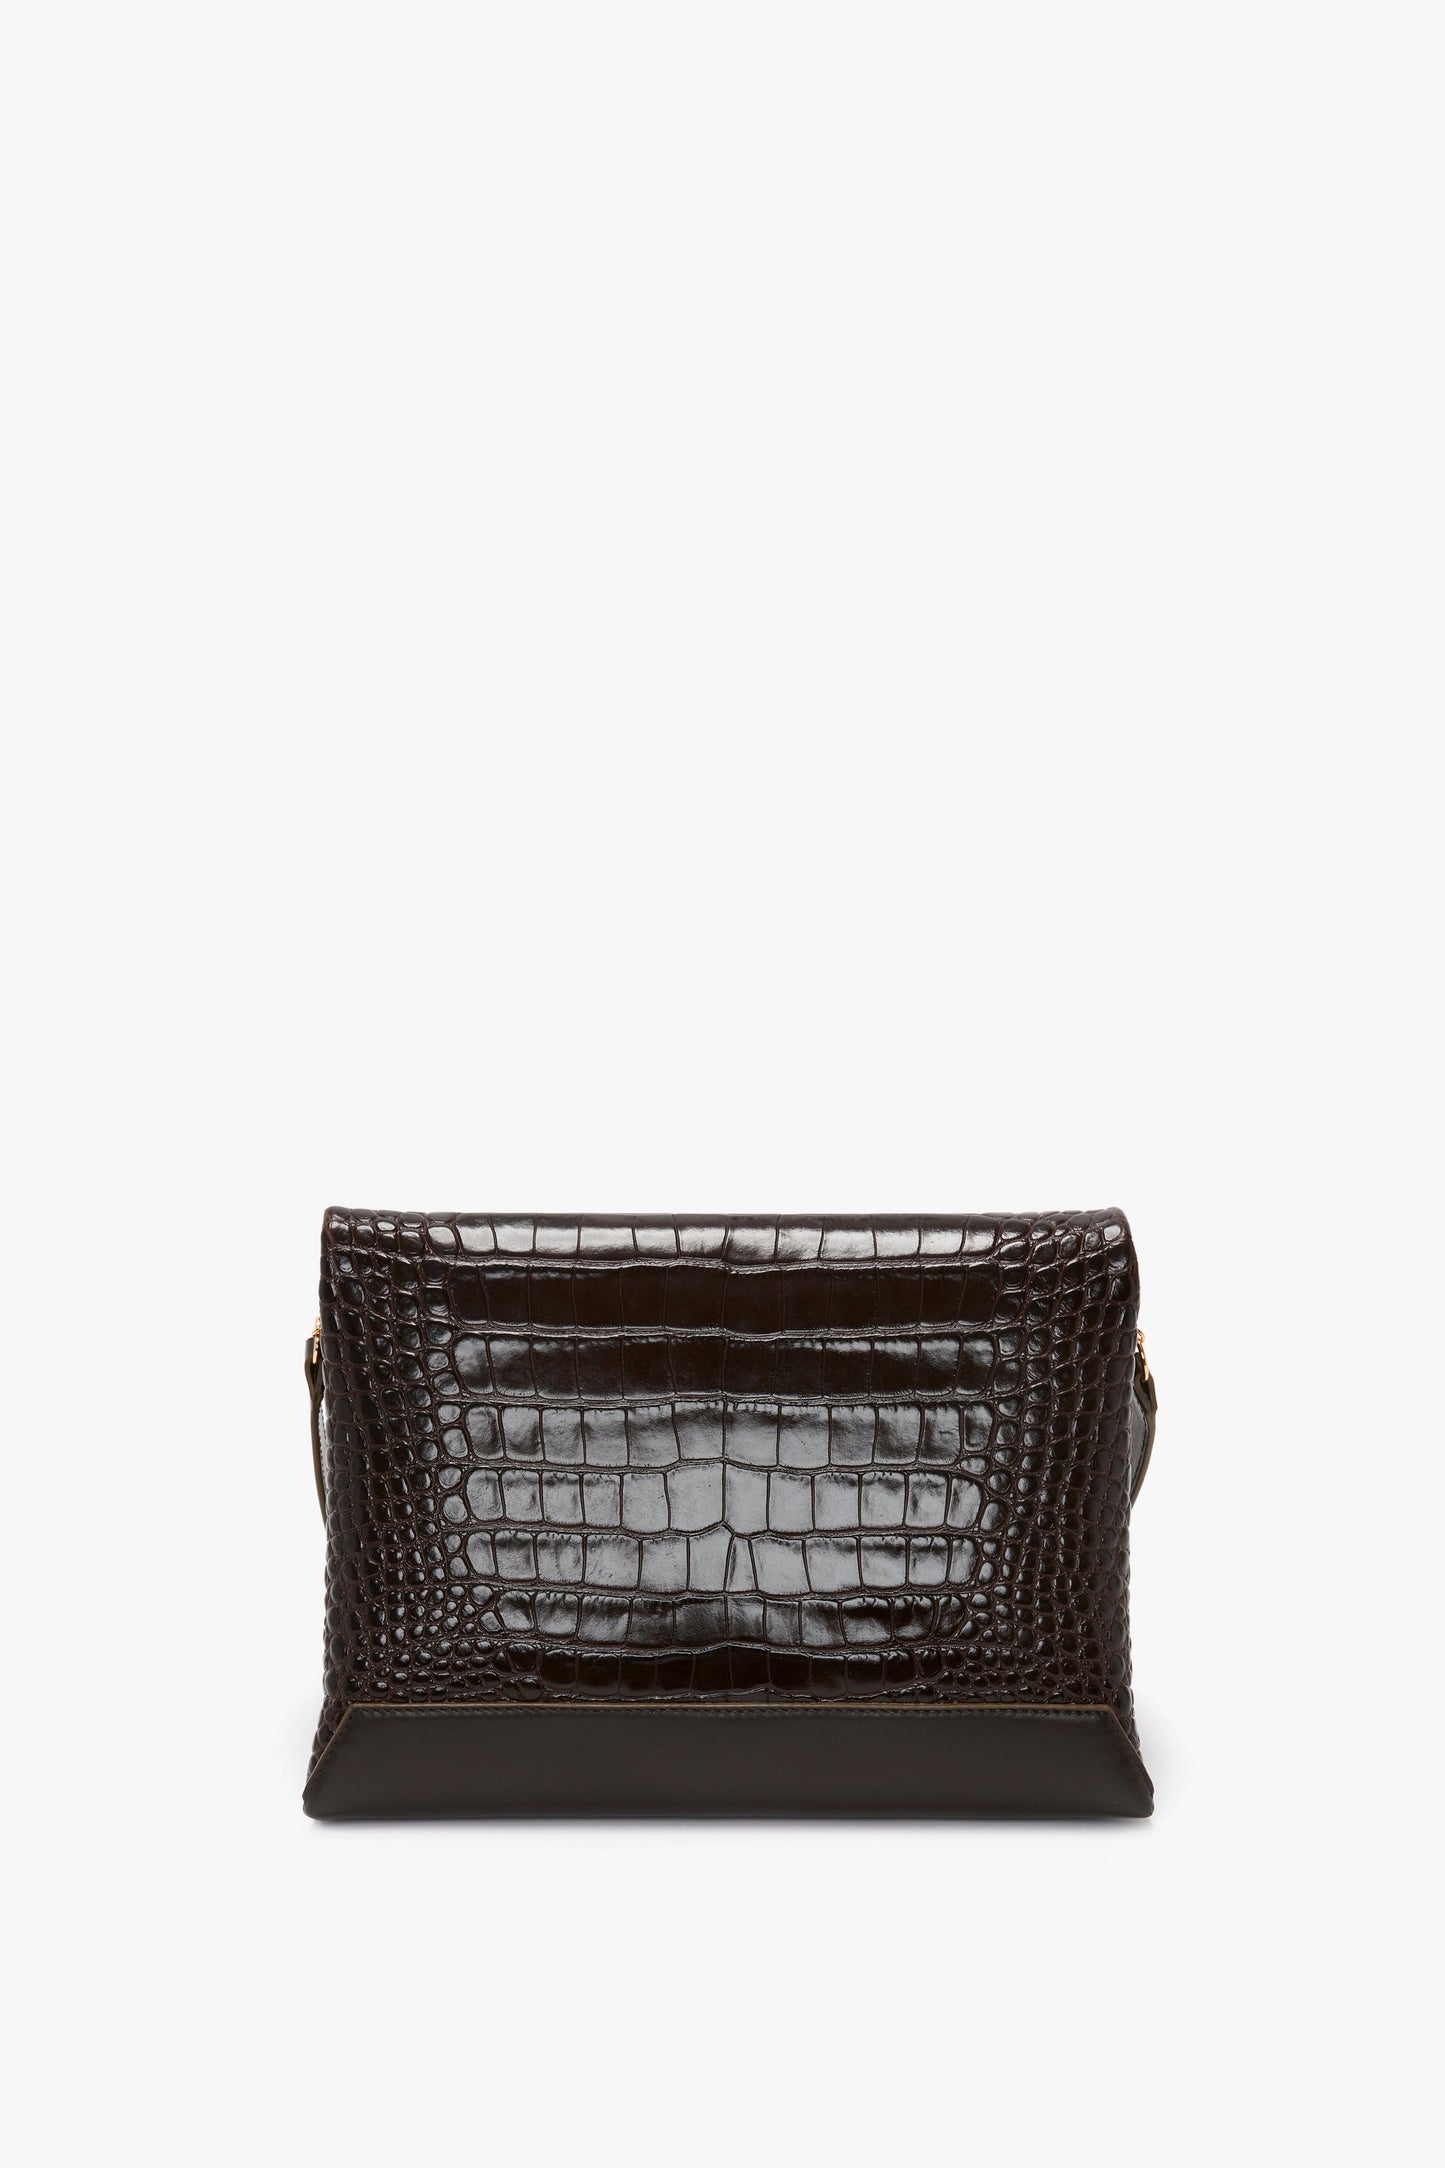 Chain Pouch With Strap In Chocolate Croc-Effect Leather